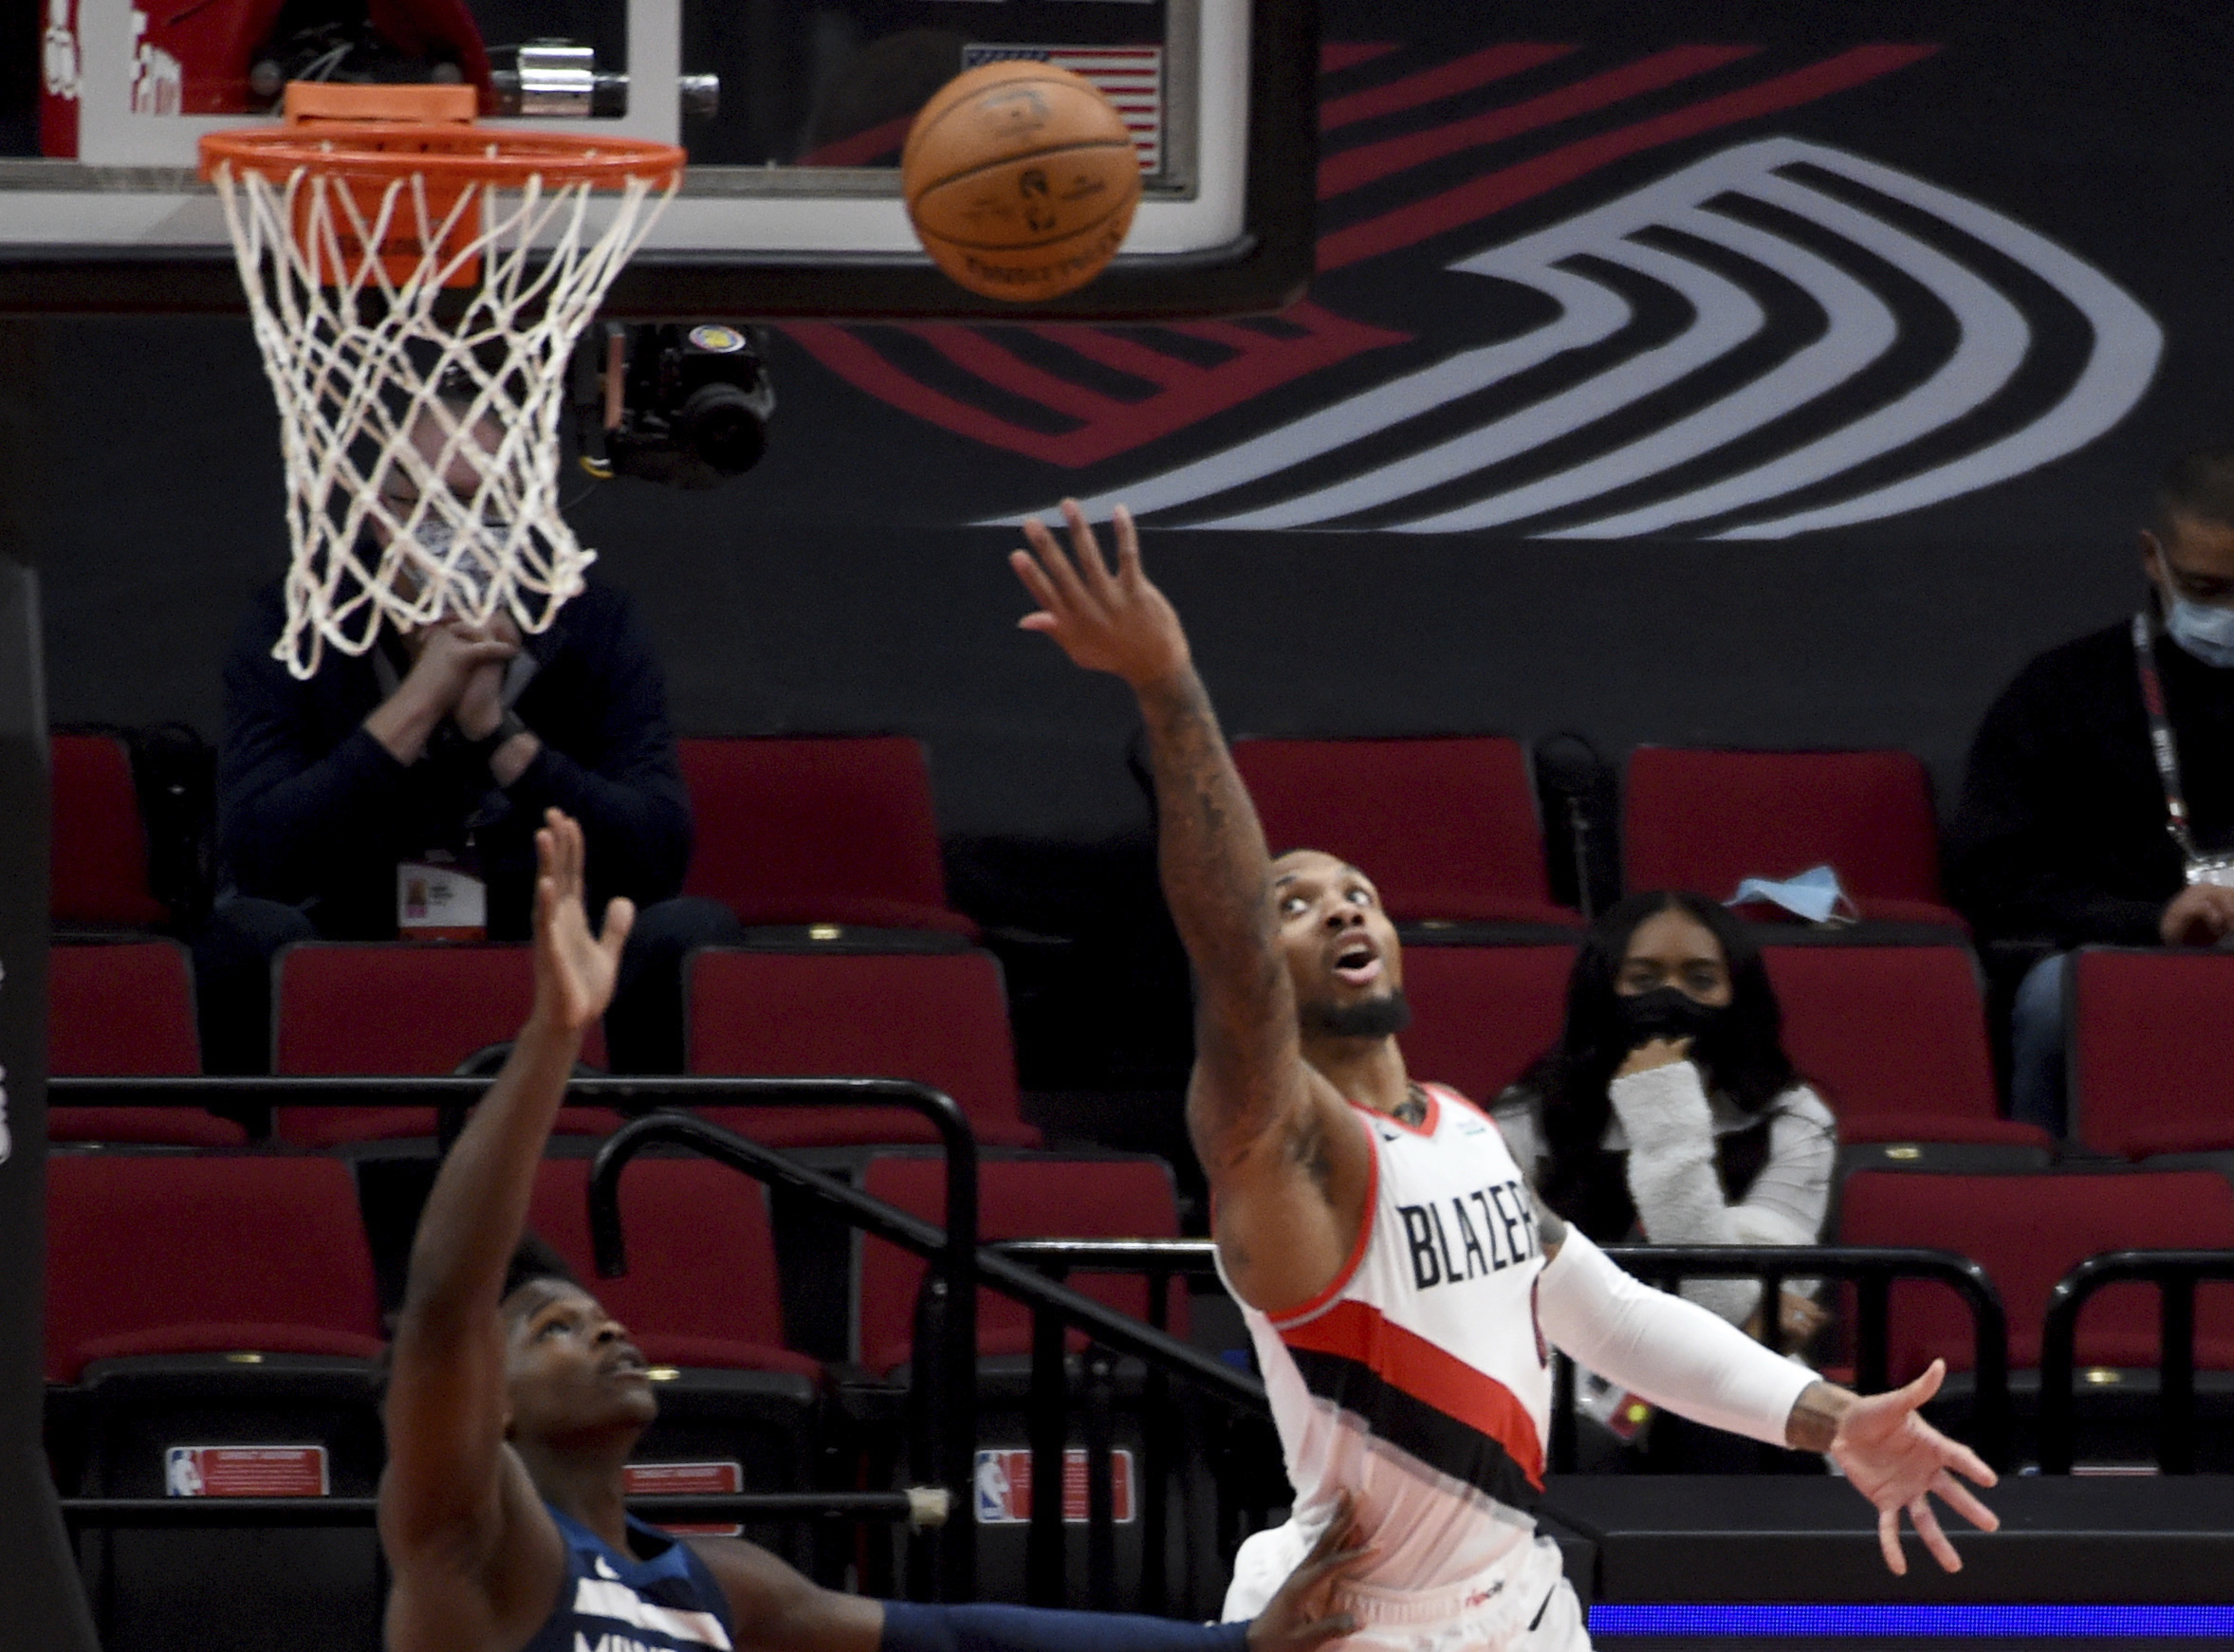 Portland Trail Blazers guard Damian Lillard, right, lays the ball in over Minnesota Timberwolves guard Anthony Edwards, left, during the first half of an NBA basketball game in Portland, Ore., Thursday, Jan. 7, 2021.